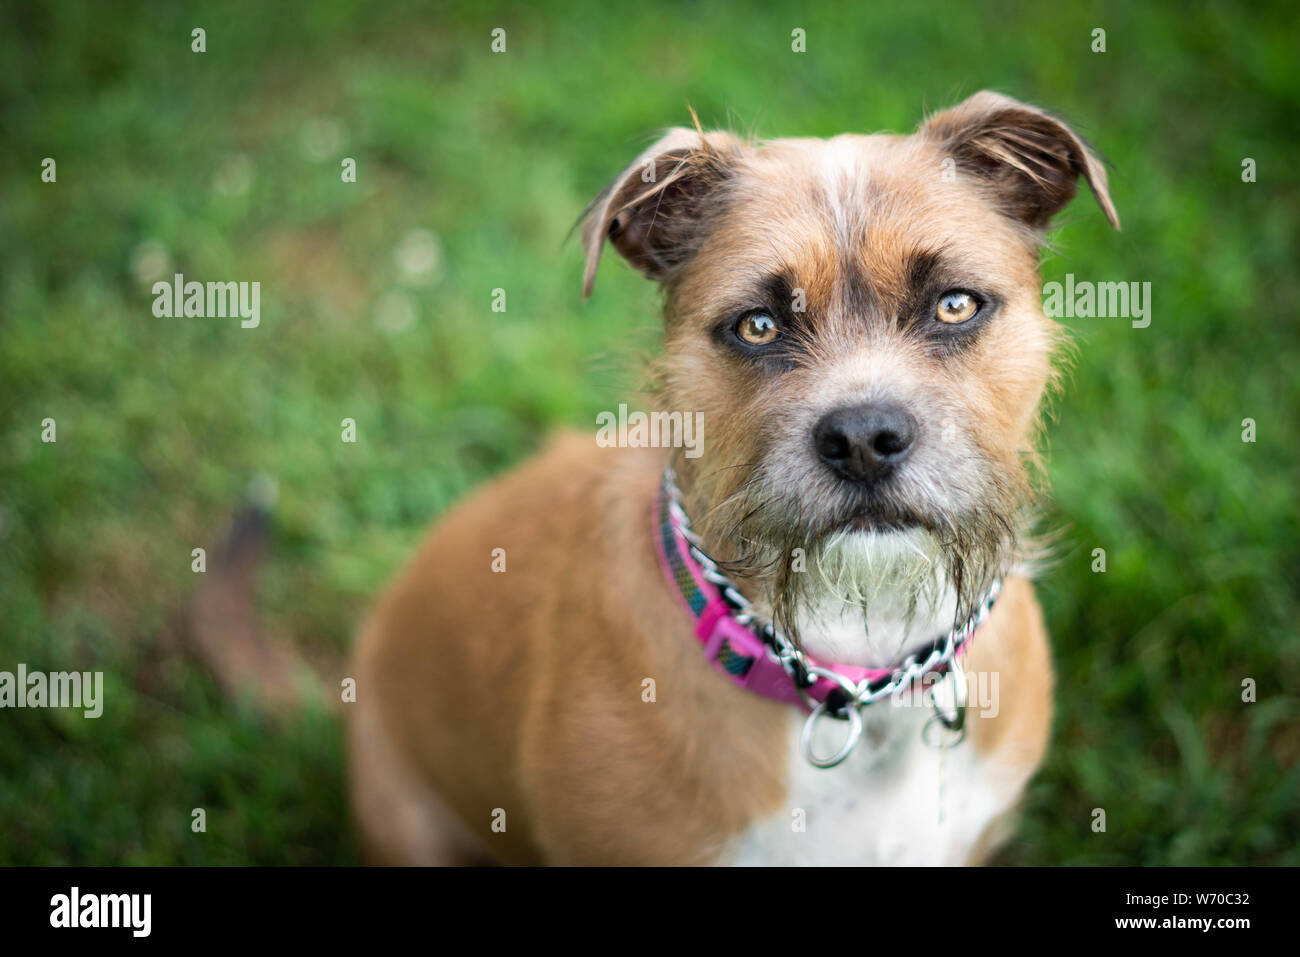 Young dog with beautiful bright eyes and pink collar, playing in backyard Stock Photo